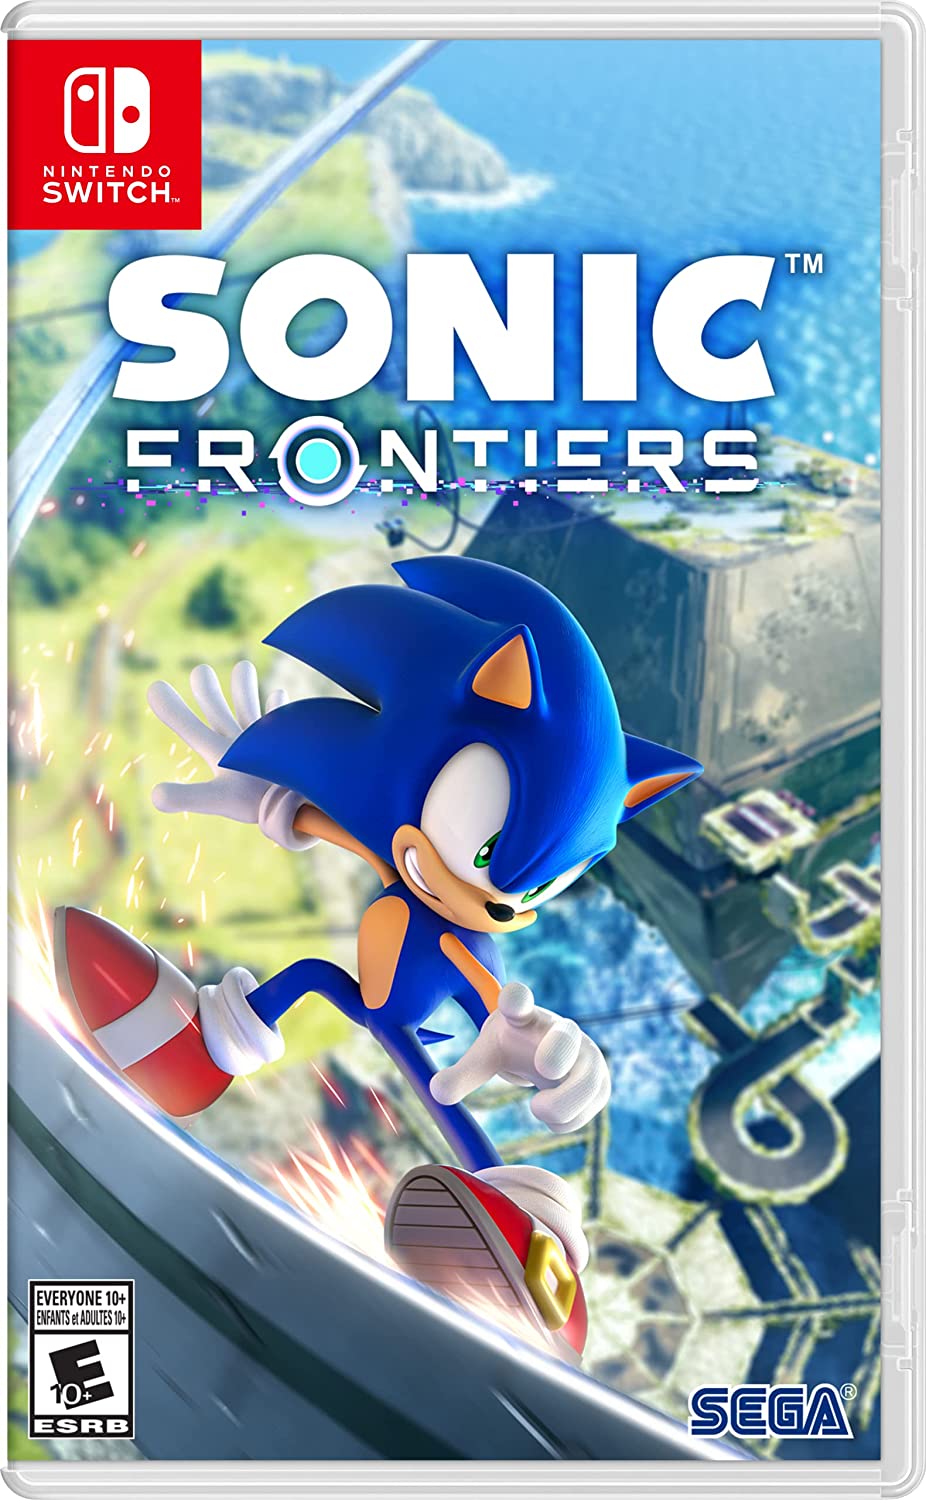 Sonic Frontiers Nintendo Switch game artwork.